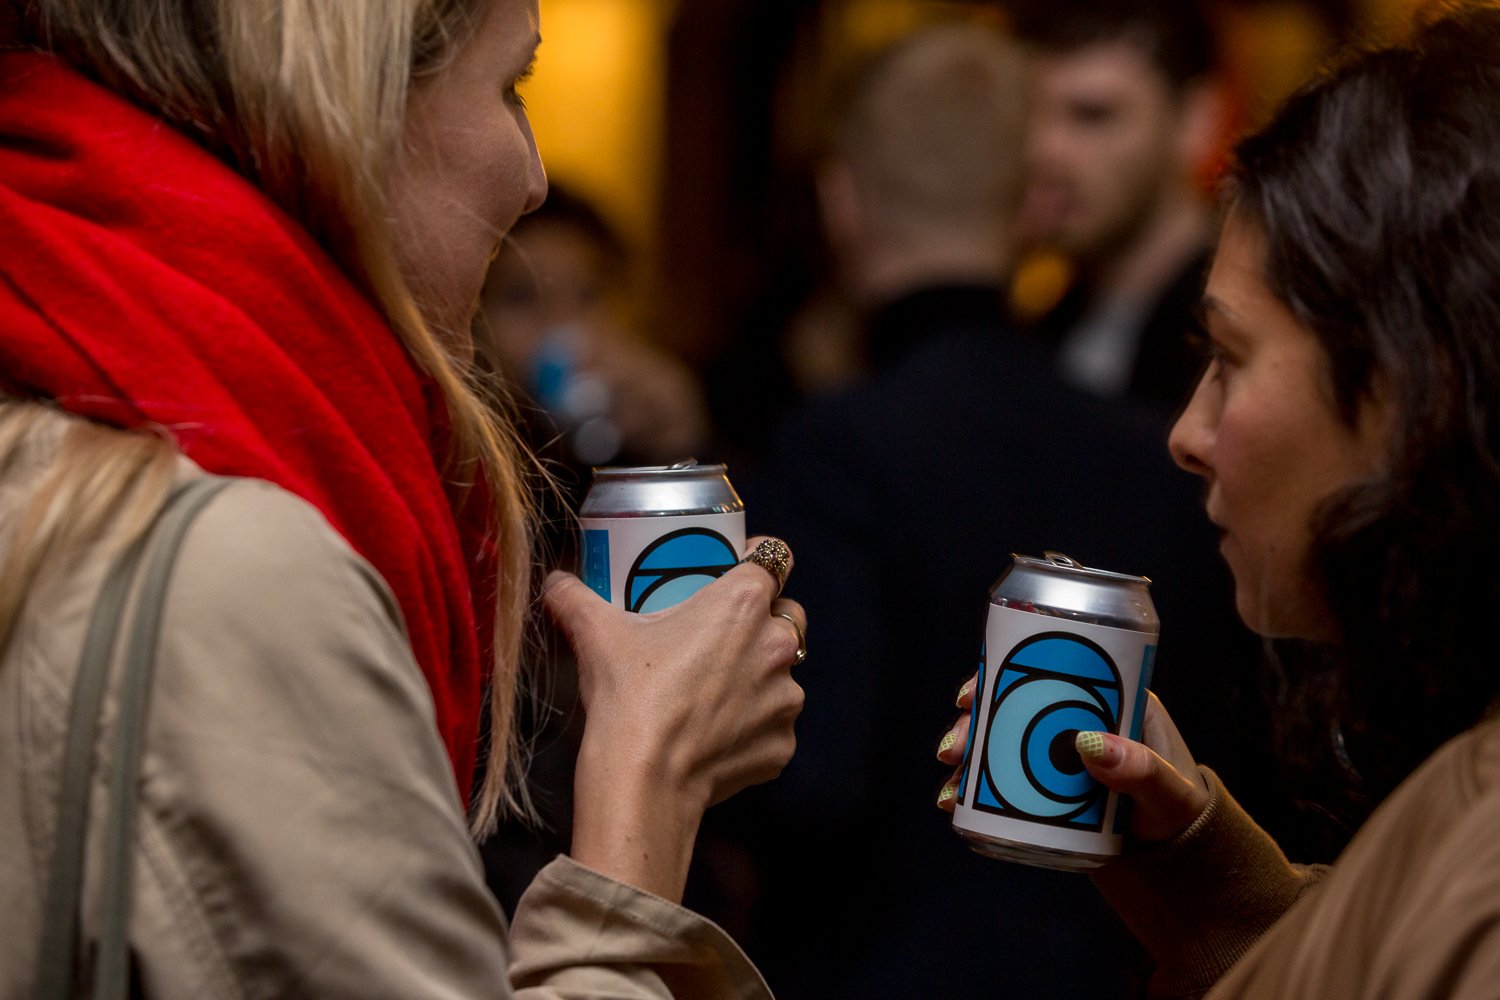 Double Take Launch event with custom beers by House of Cans